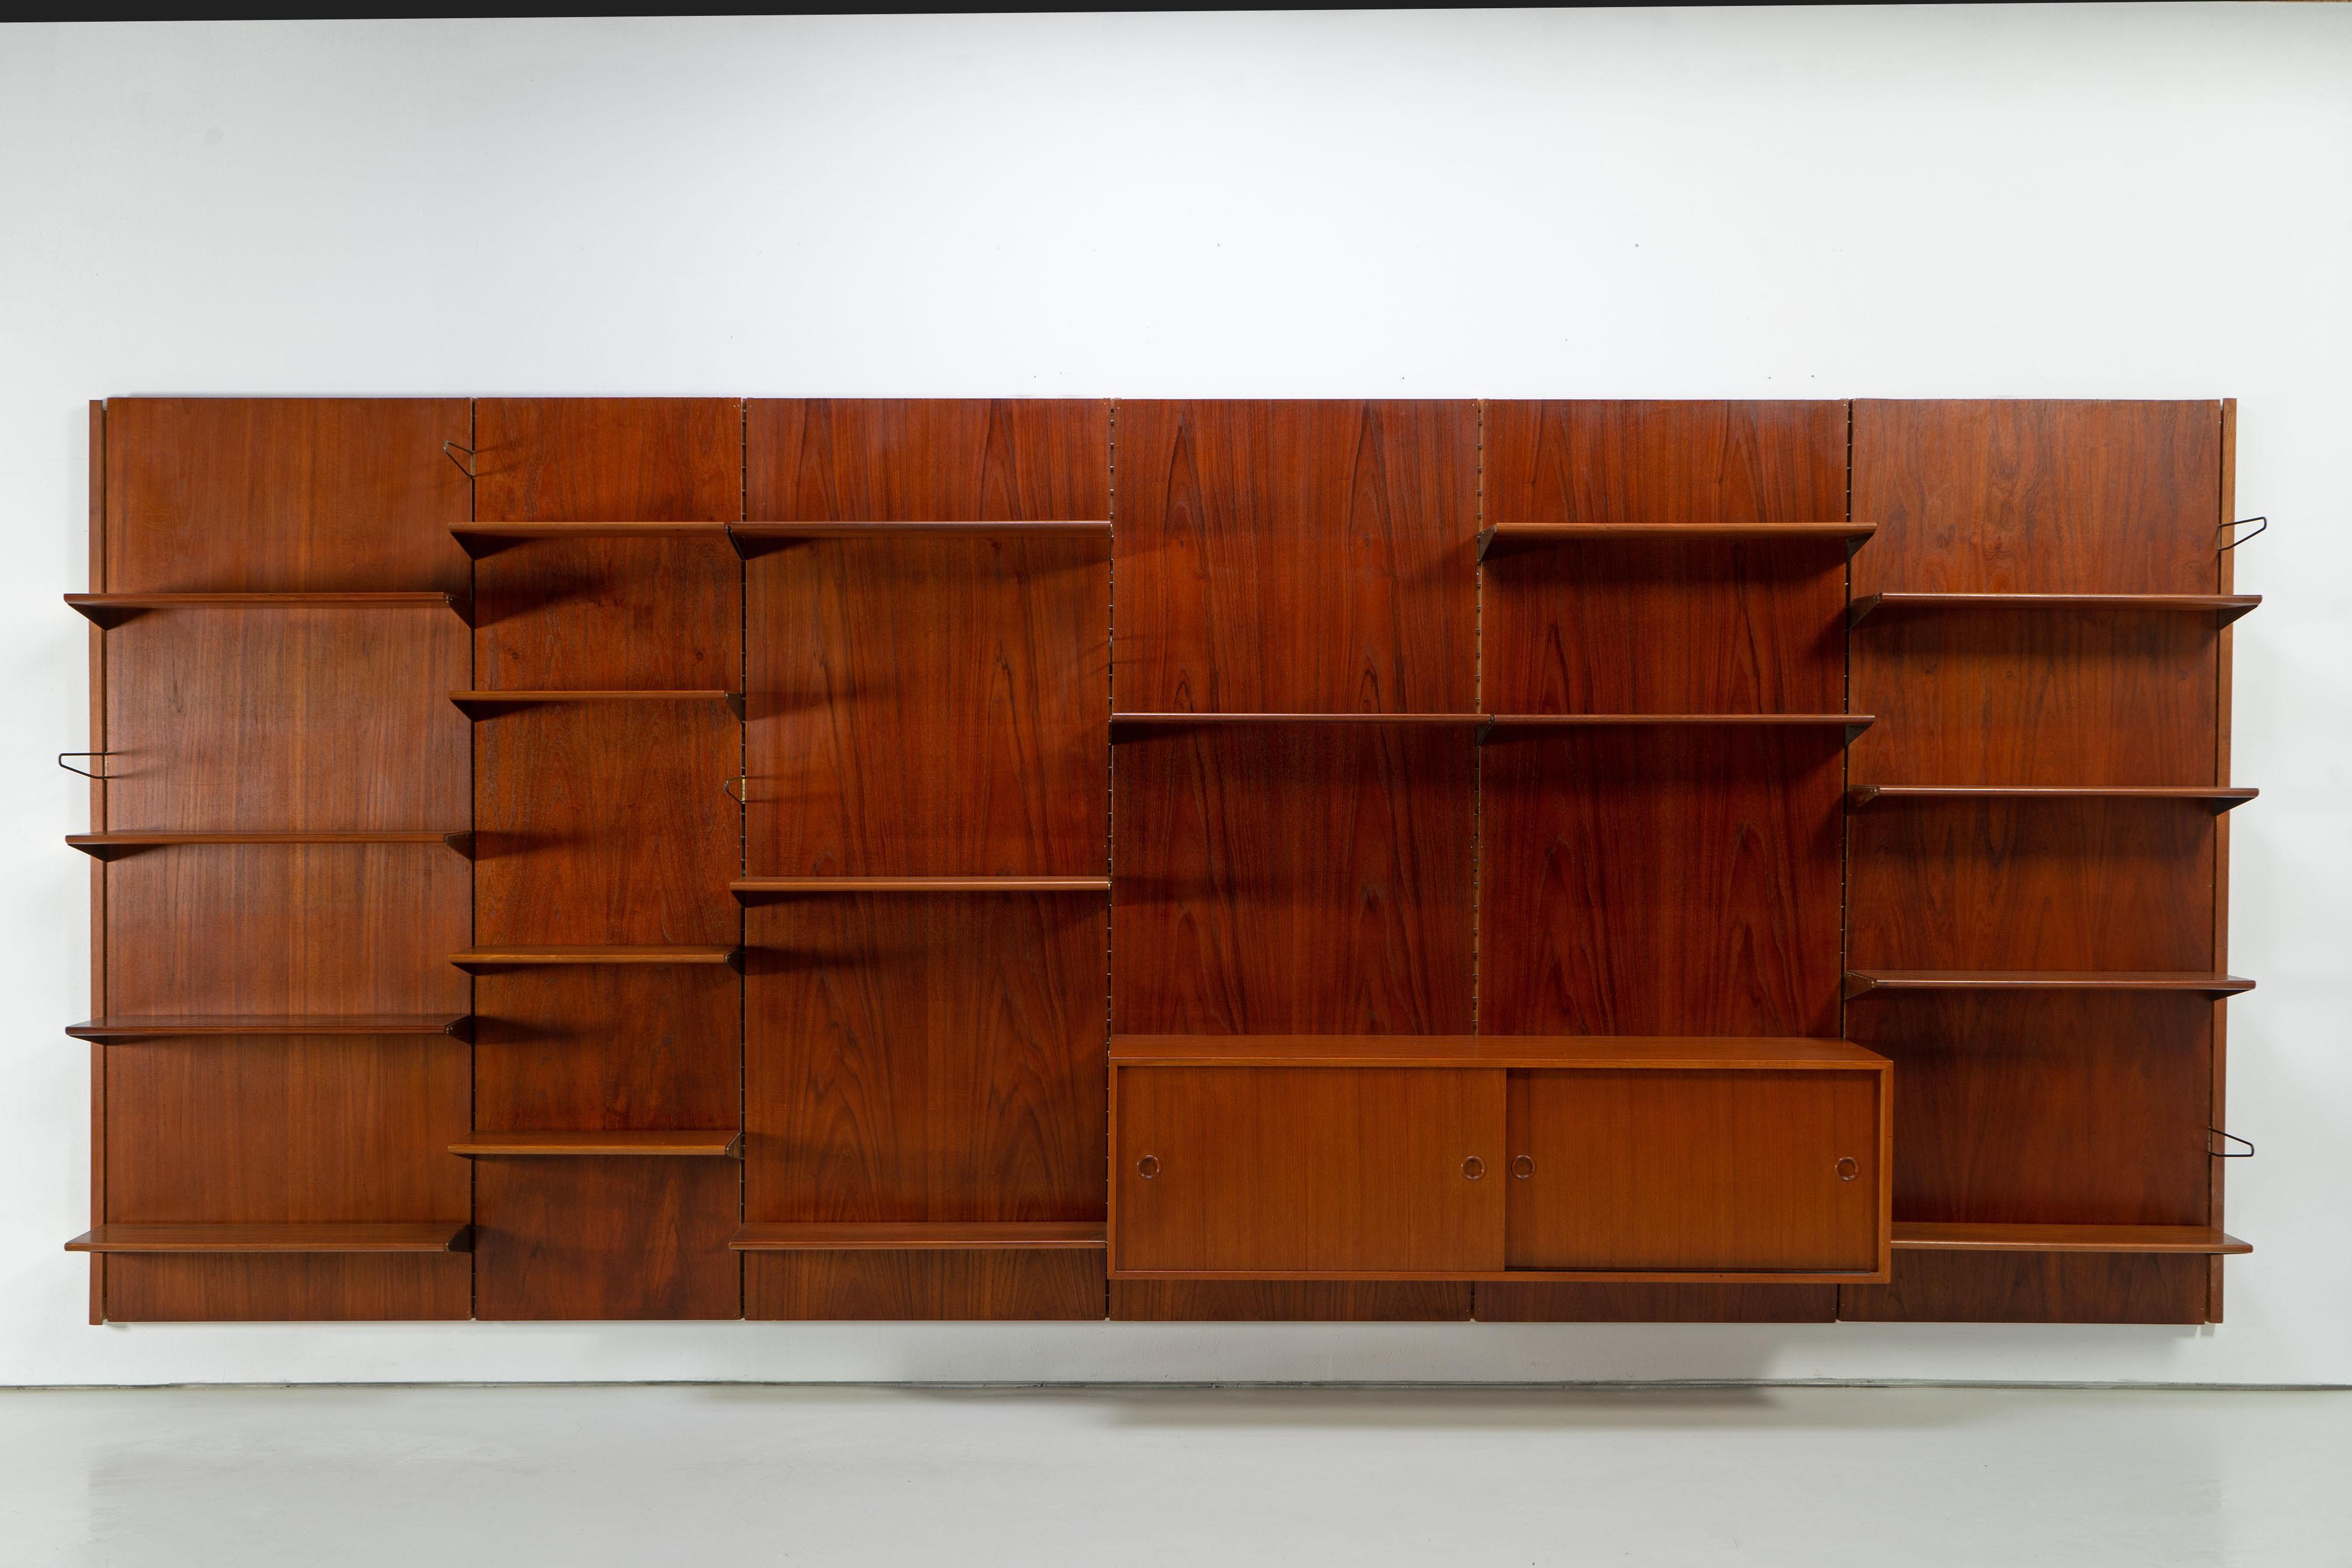 Large modular wall shelf BO71 made of beautiful teak, designed by Finn Juhl. Placement of shelves and sideboard can be freely chosen. The shelf was manufactured by Bovirke in the 1960s and sold through Bo-EX.